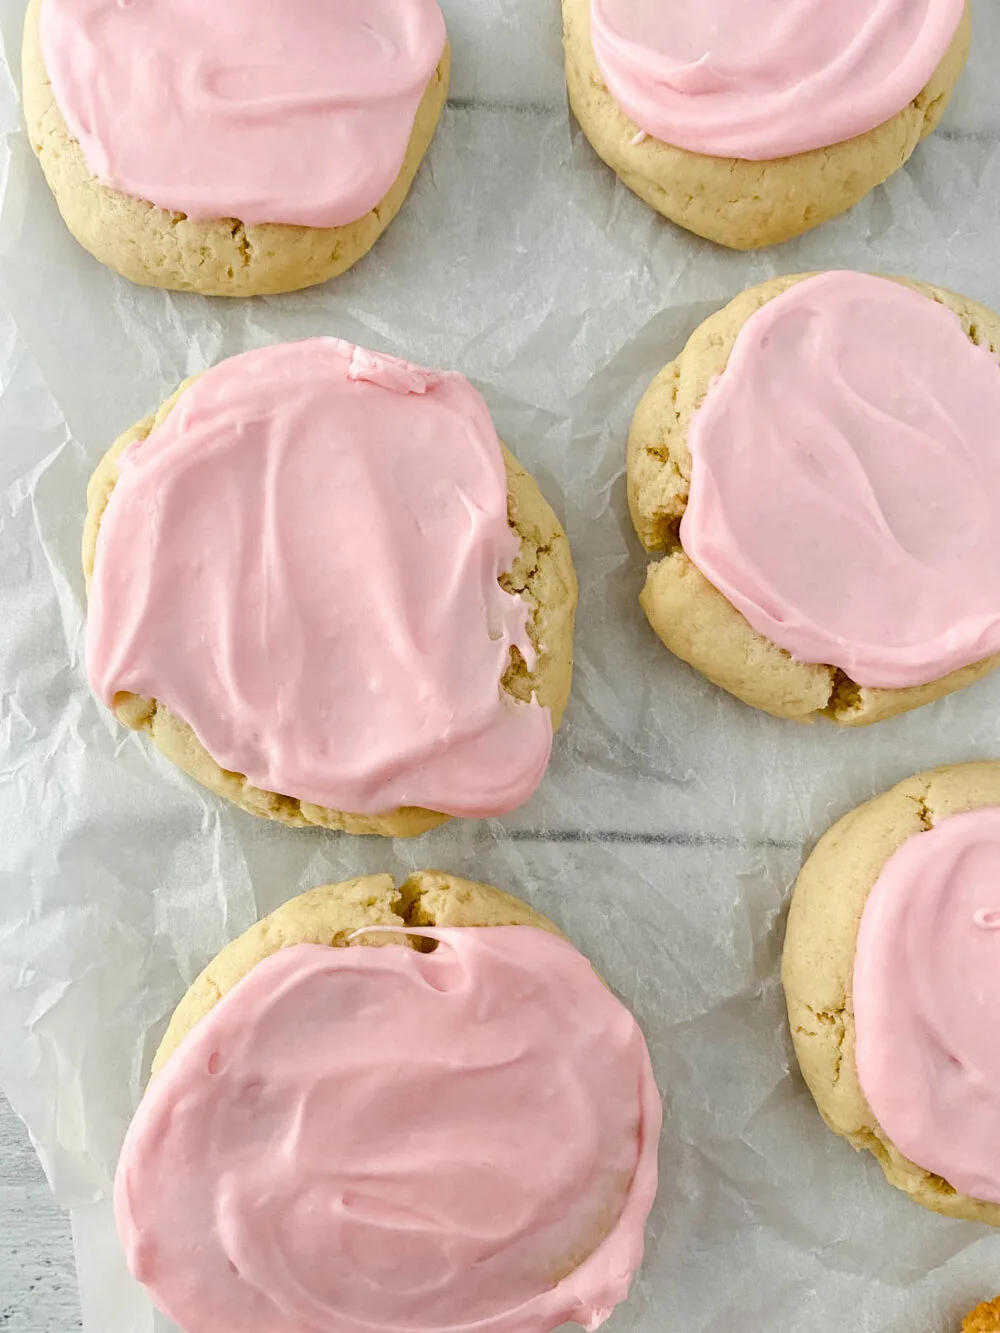 These Copycat Crumbl Sugar Cookies are absolutely decadent! We love the fact that they’re a simple cookie, but hold such amazing taste. They also make for a great stand-alone dessert.